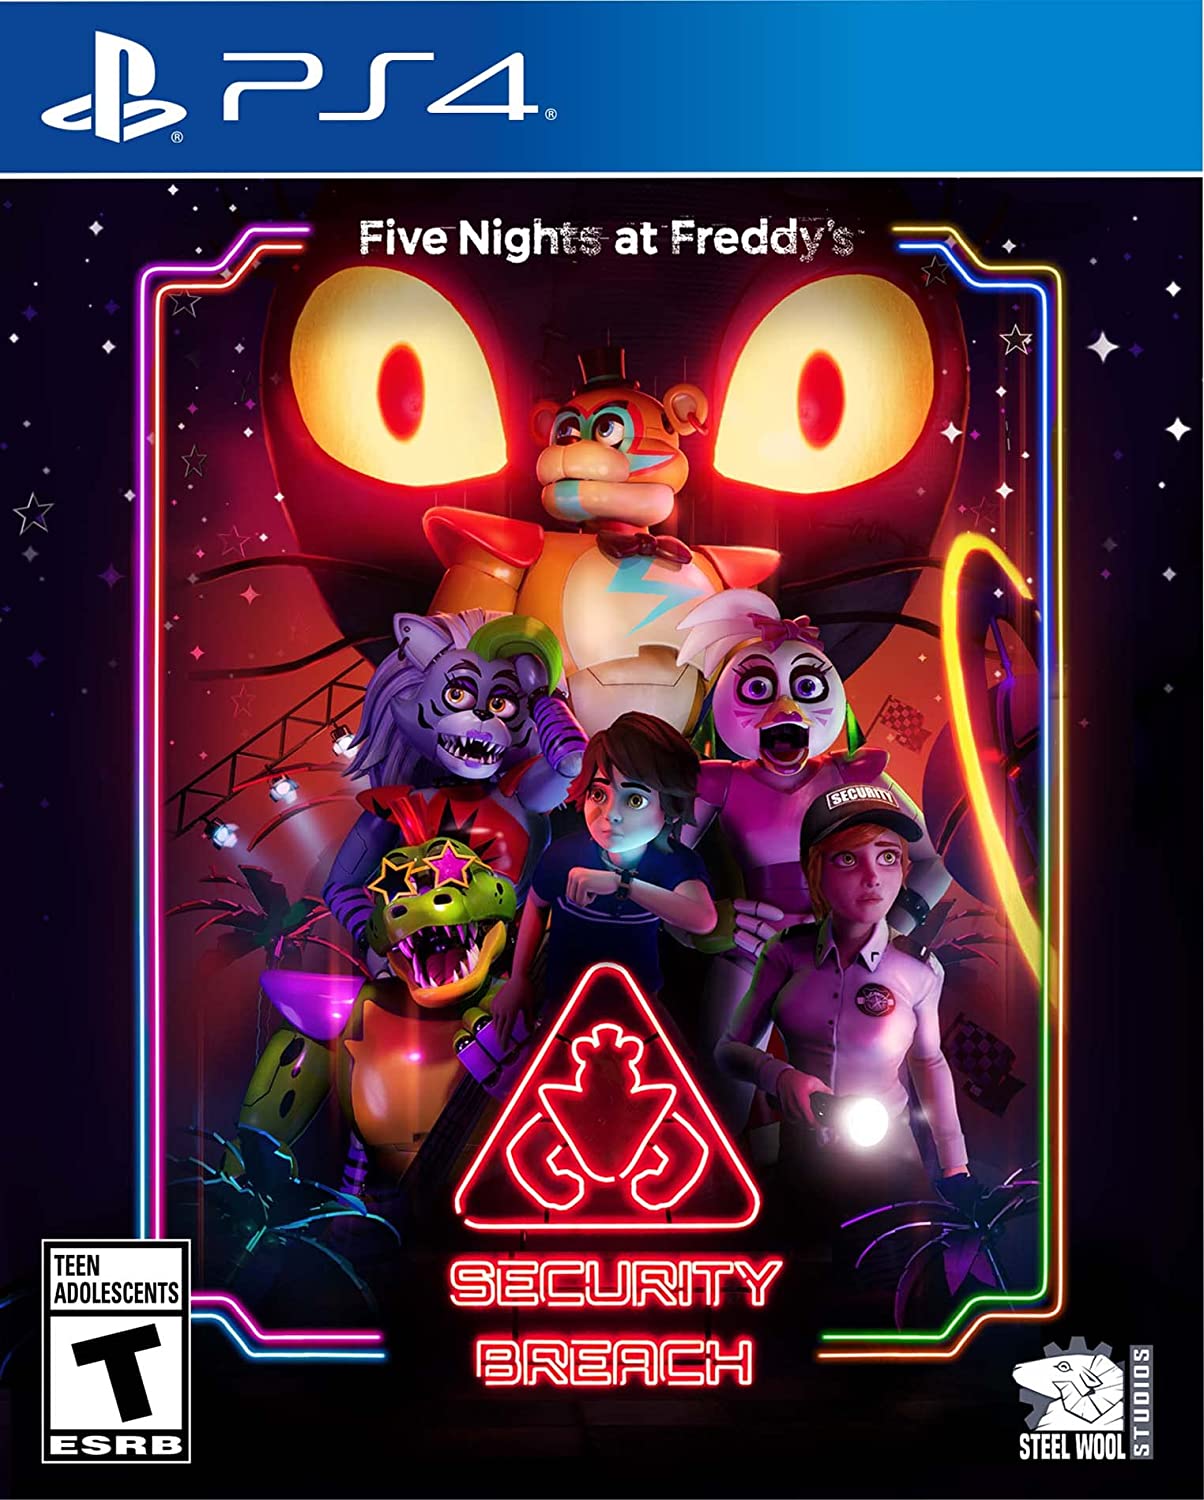 Playstation 4 - Five Nights at Freddy's: Security Breach [NEW]